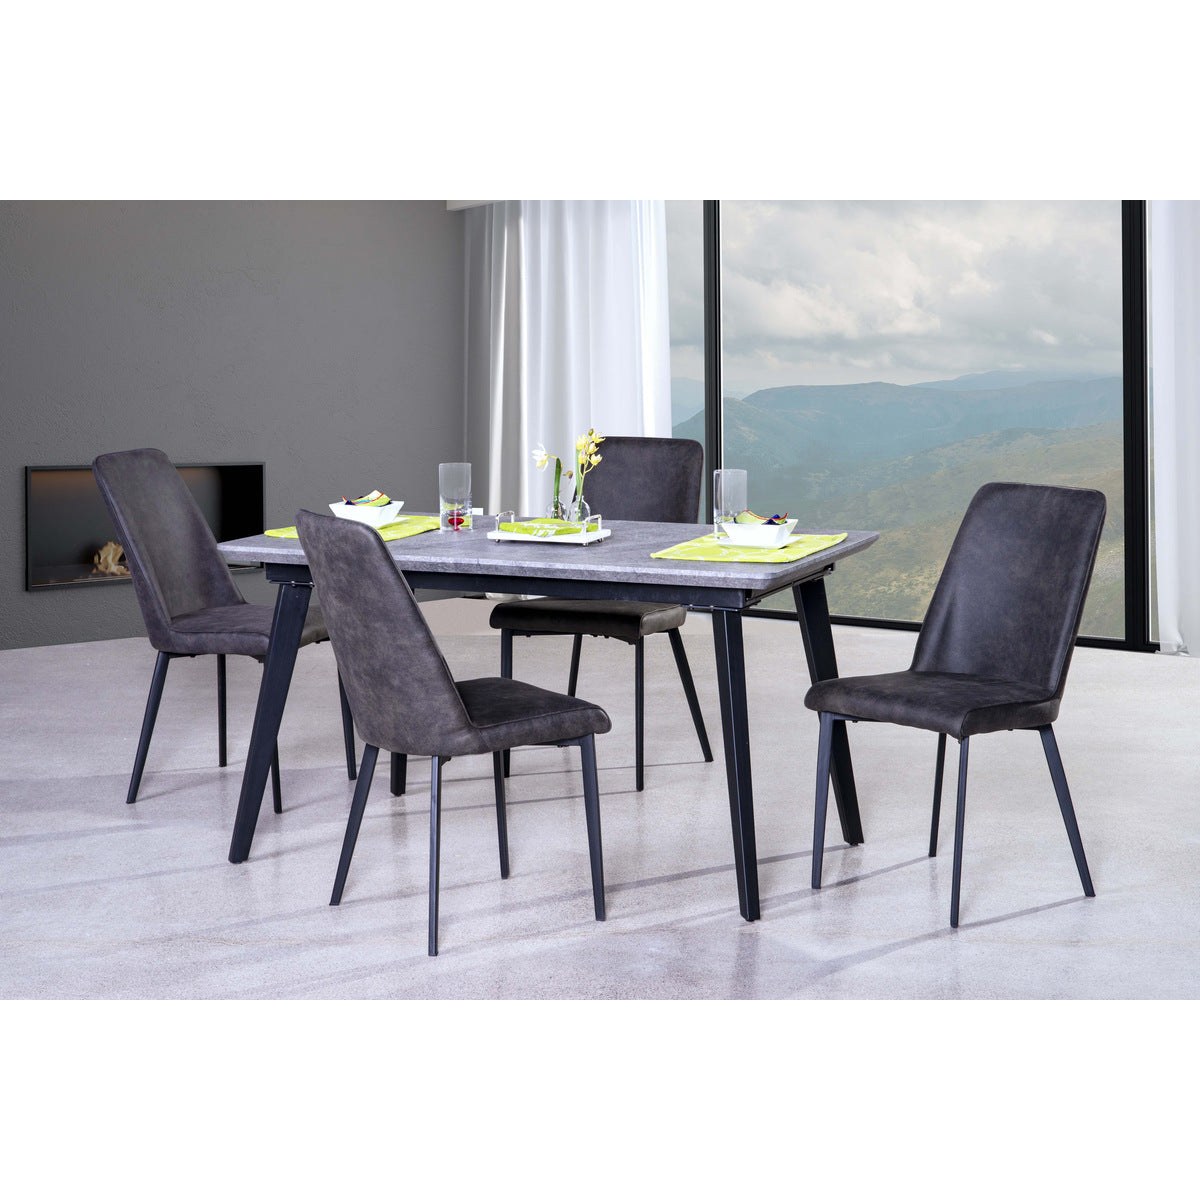 Arabica Dining Collection 6828